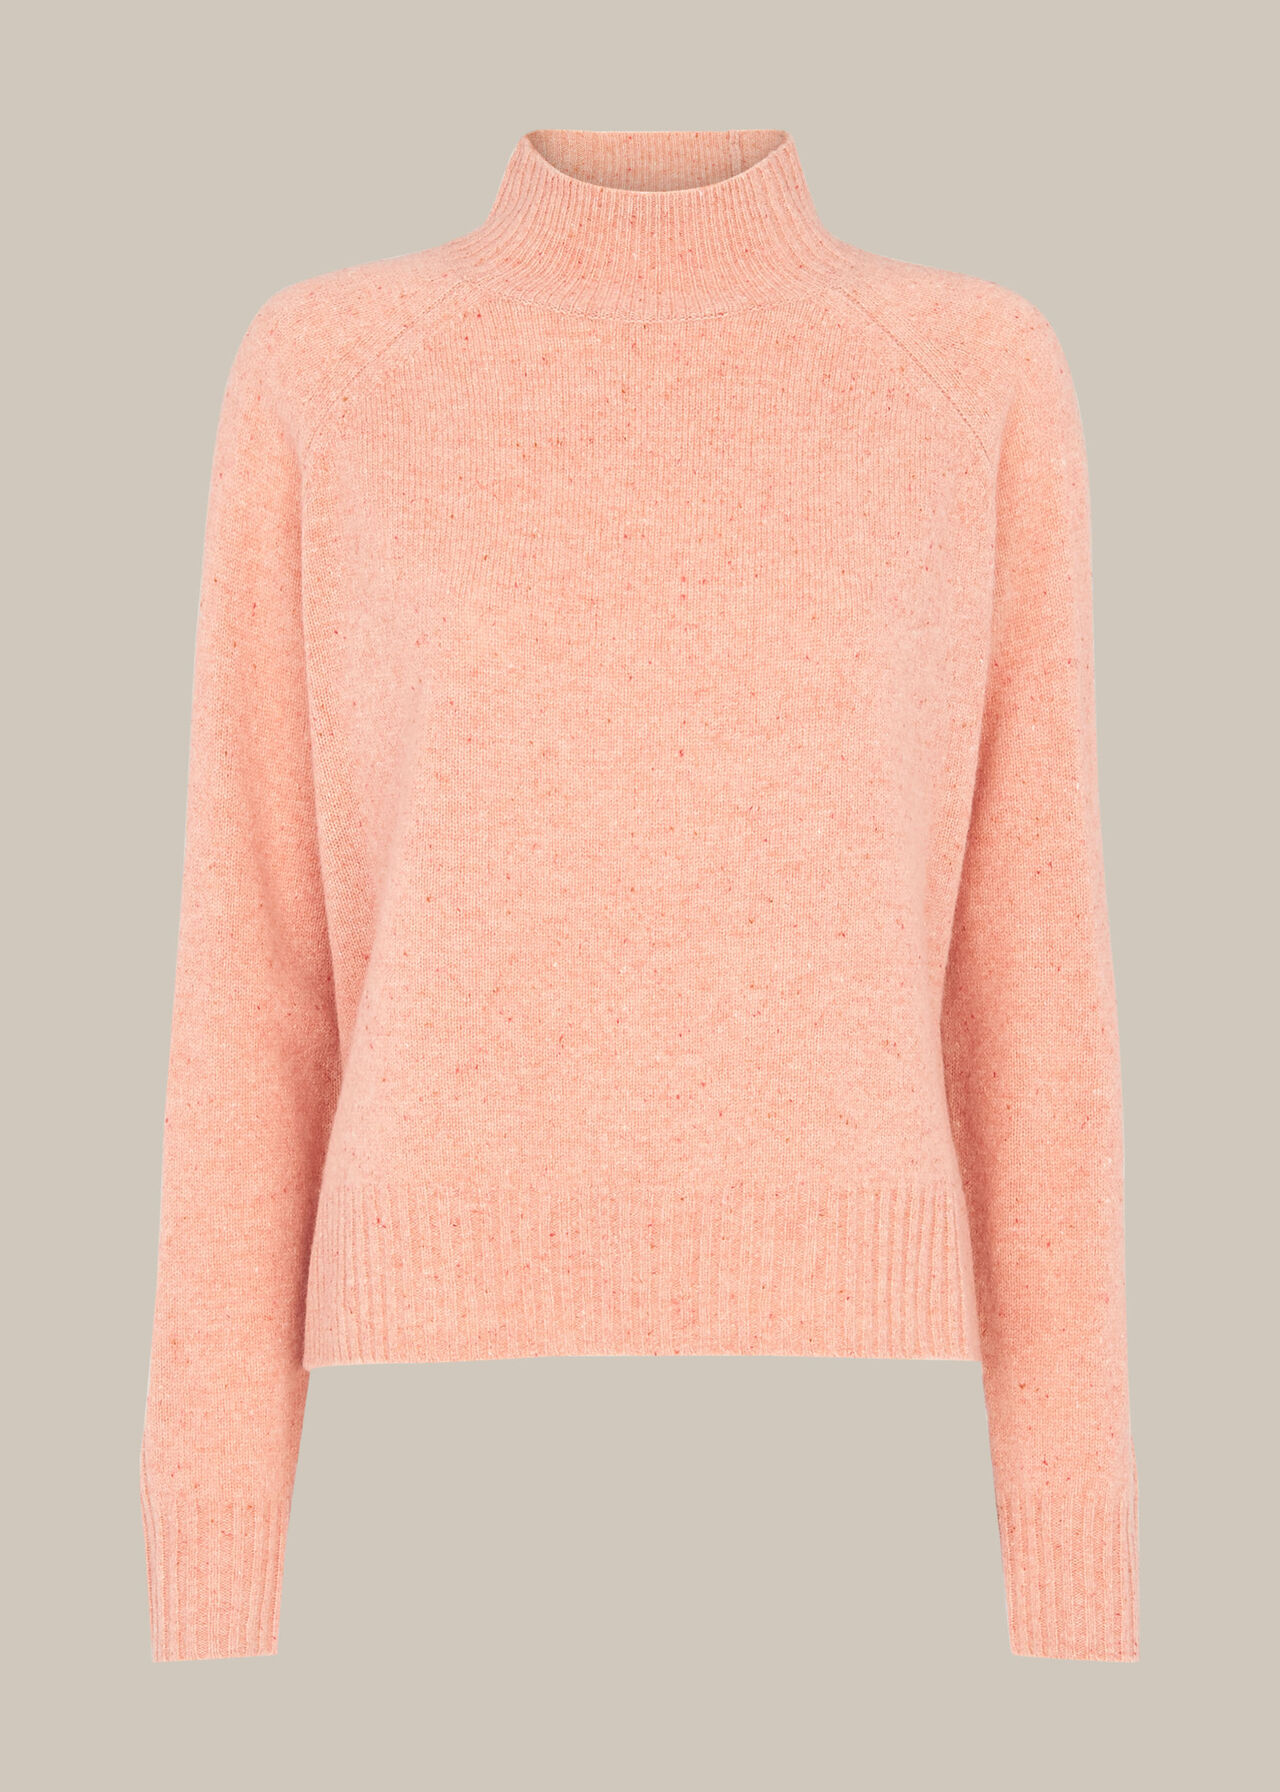 Pale Pink Funnel Neck Flecked Knit | WHISTLES | Whistles UK